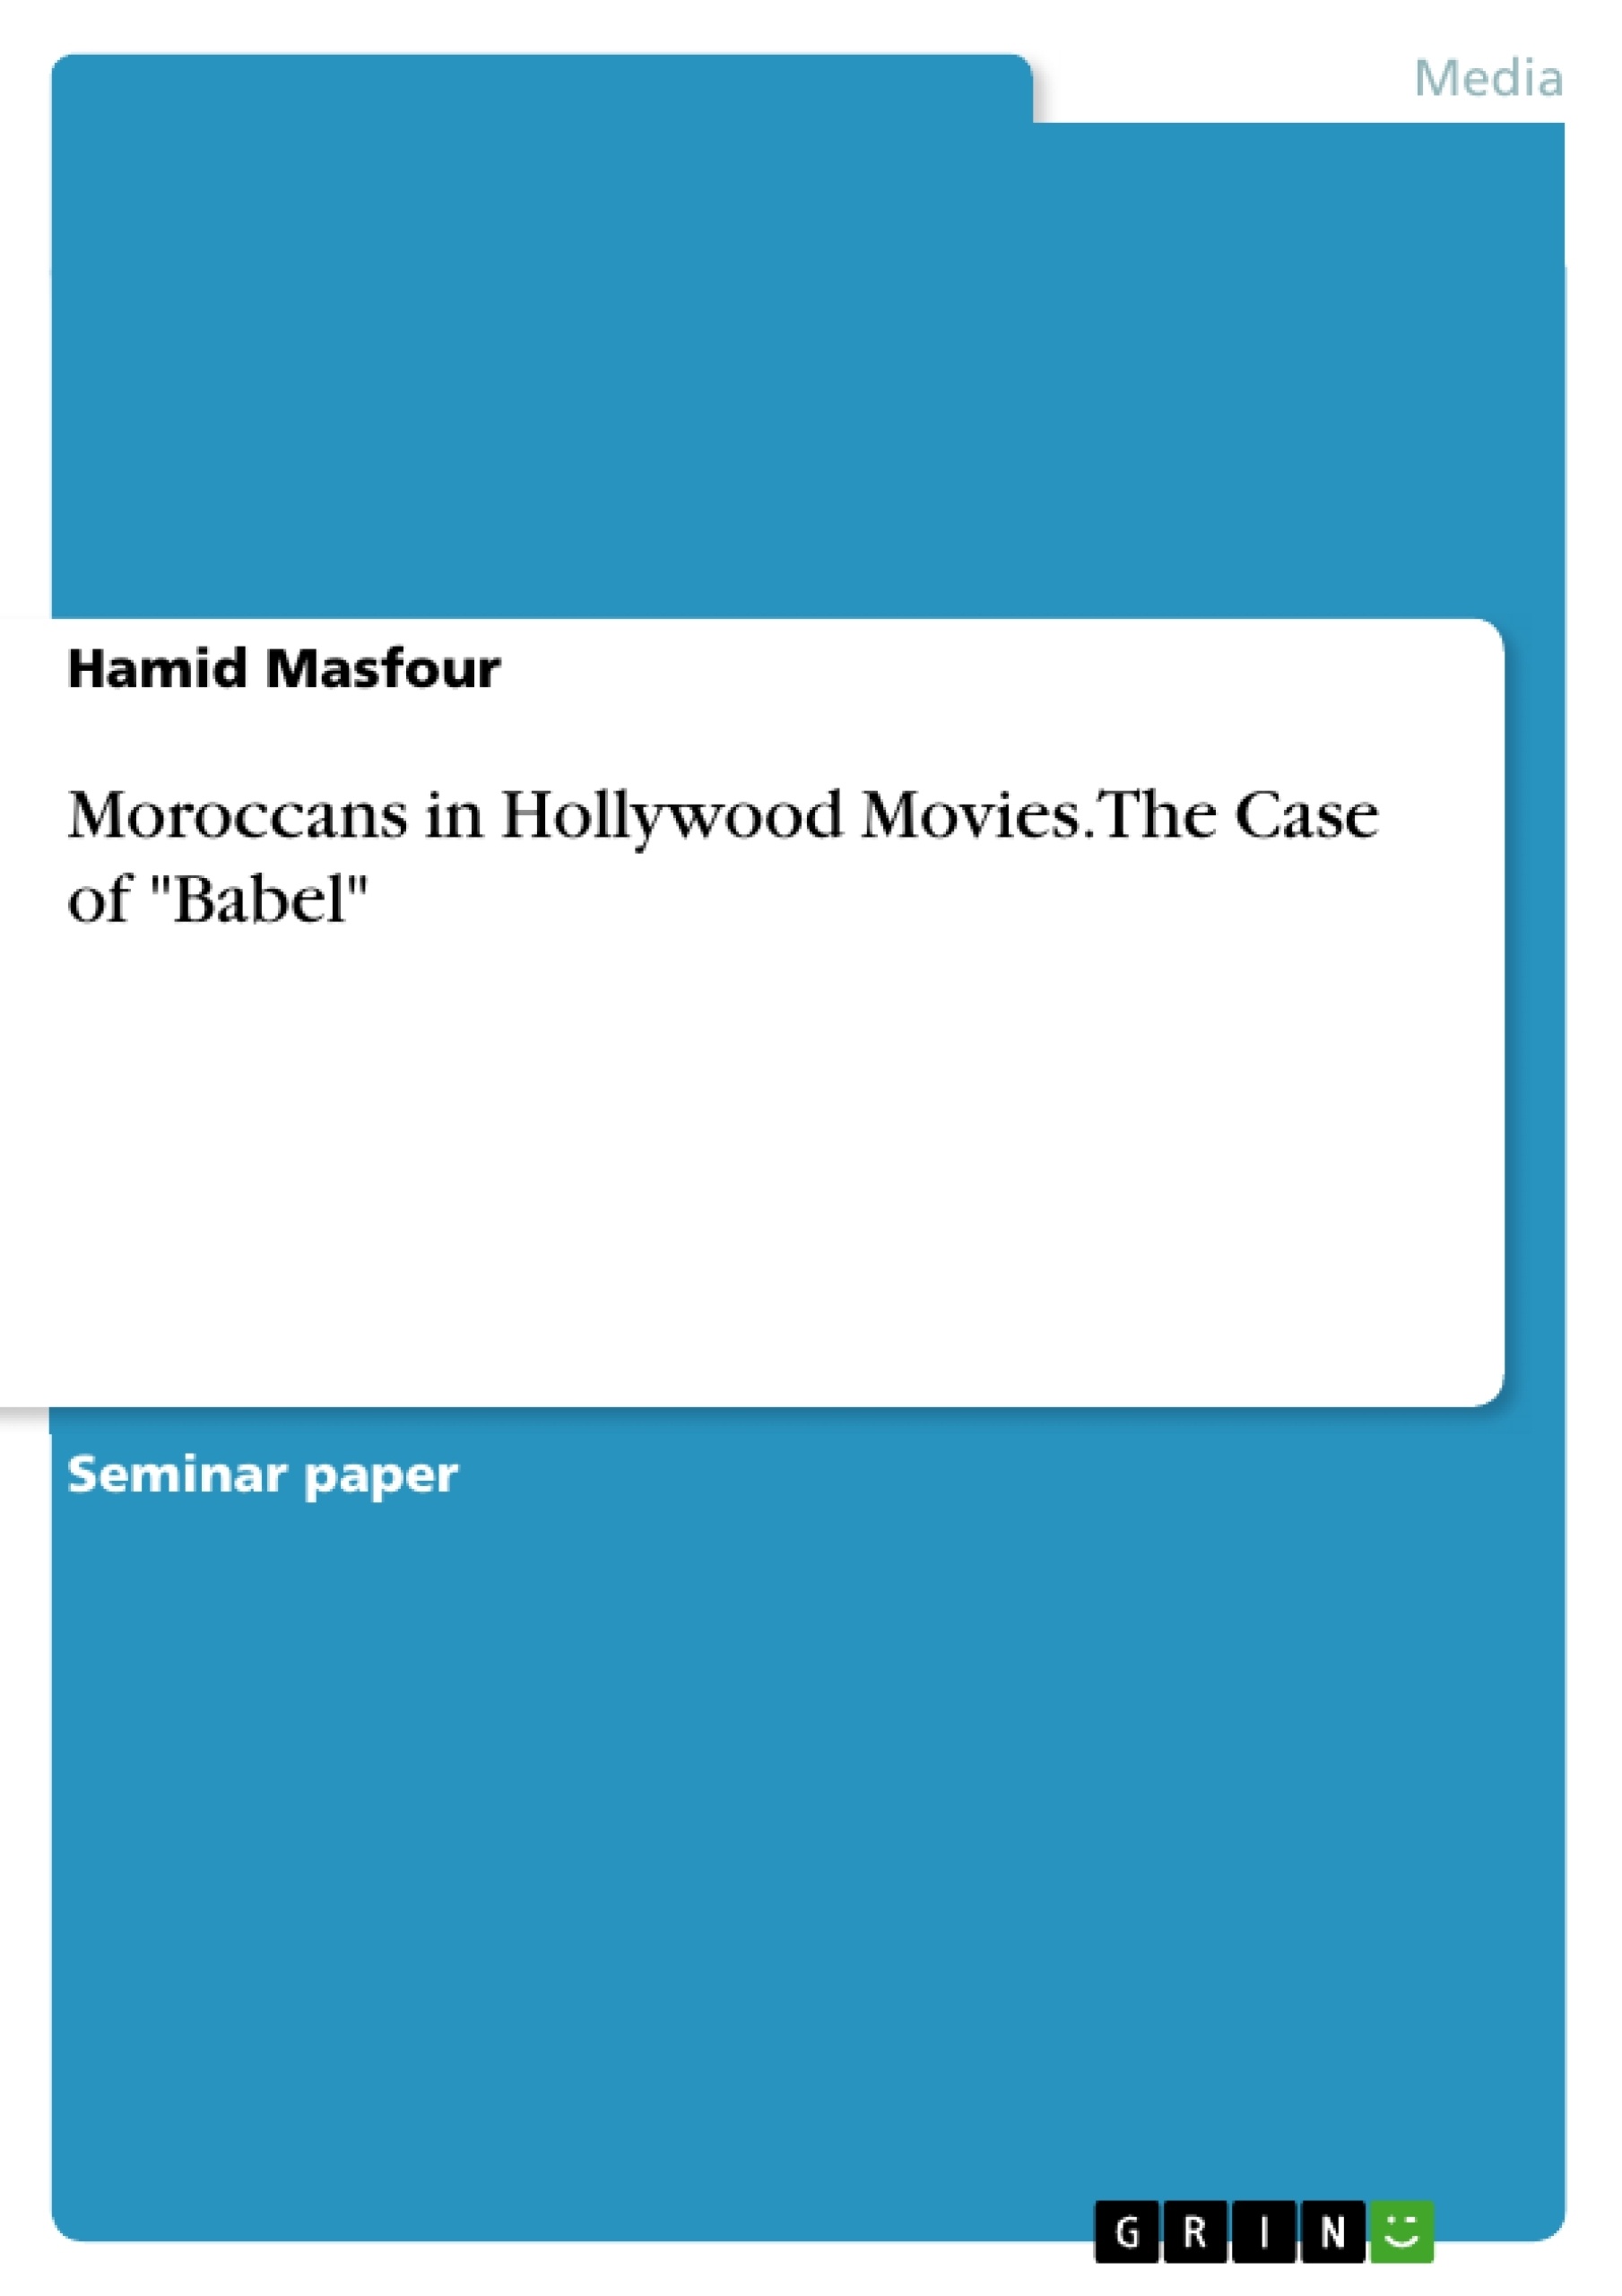 Título: Moroccans in Hollywood Movies. The Case of "Babel"